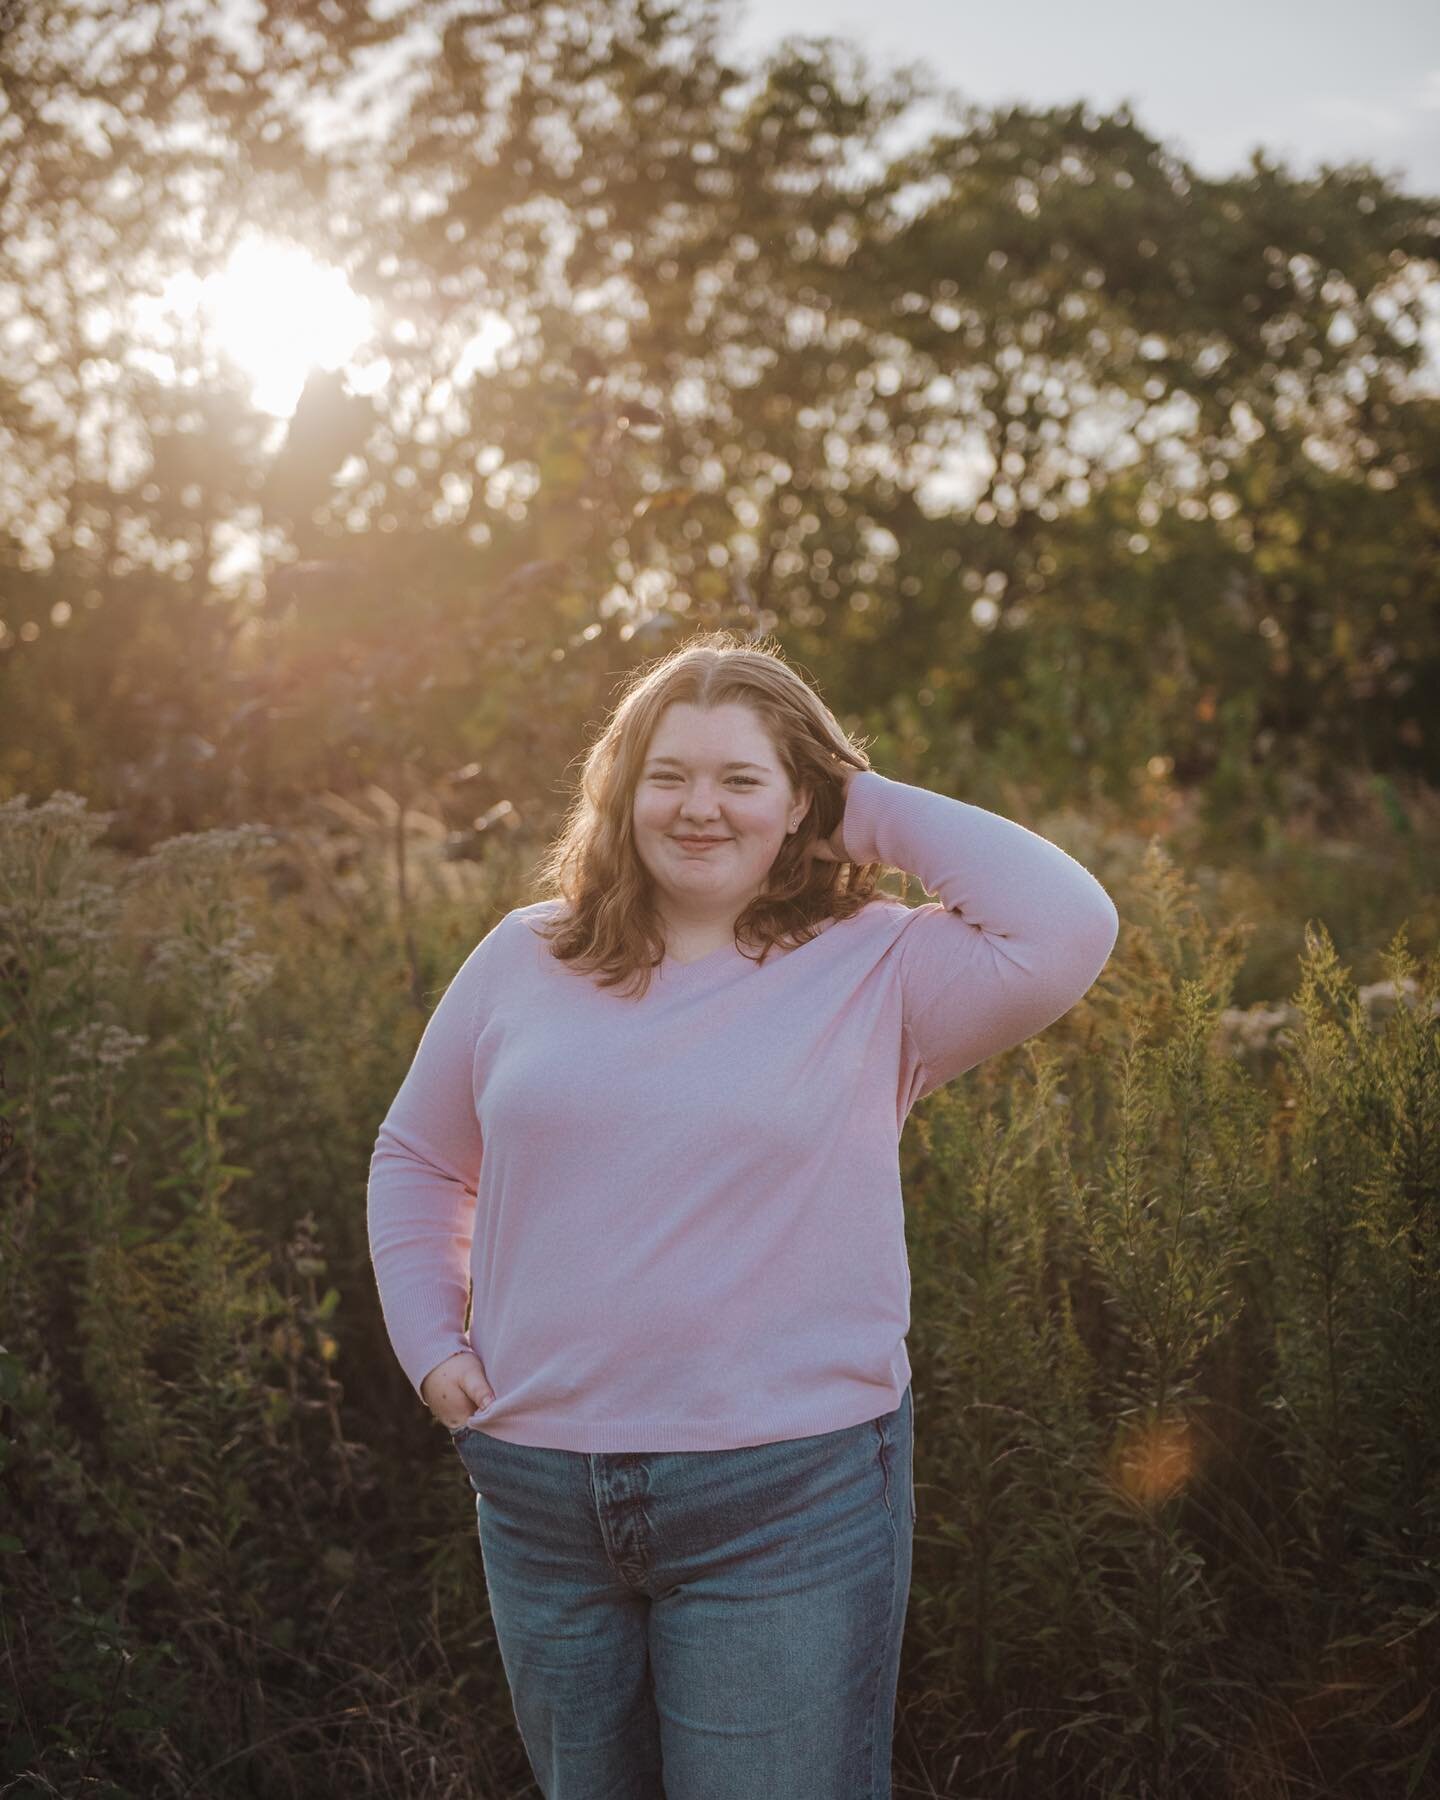 Just a few sneaky peeks of Maggie&rsquo;s Senior session!

Isn&rsquo;t she just the cutest! I had soo much fun with her and trust me I have soo much more to share!!

And by the way, Yes I do senior sessions! And Yes, please message me to book yours n